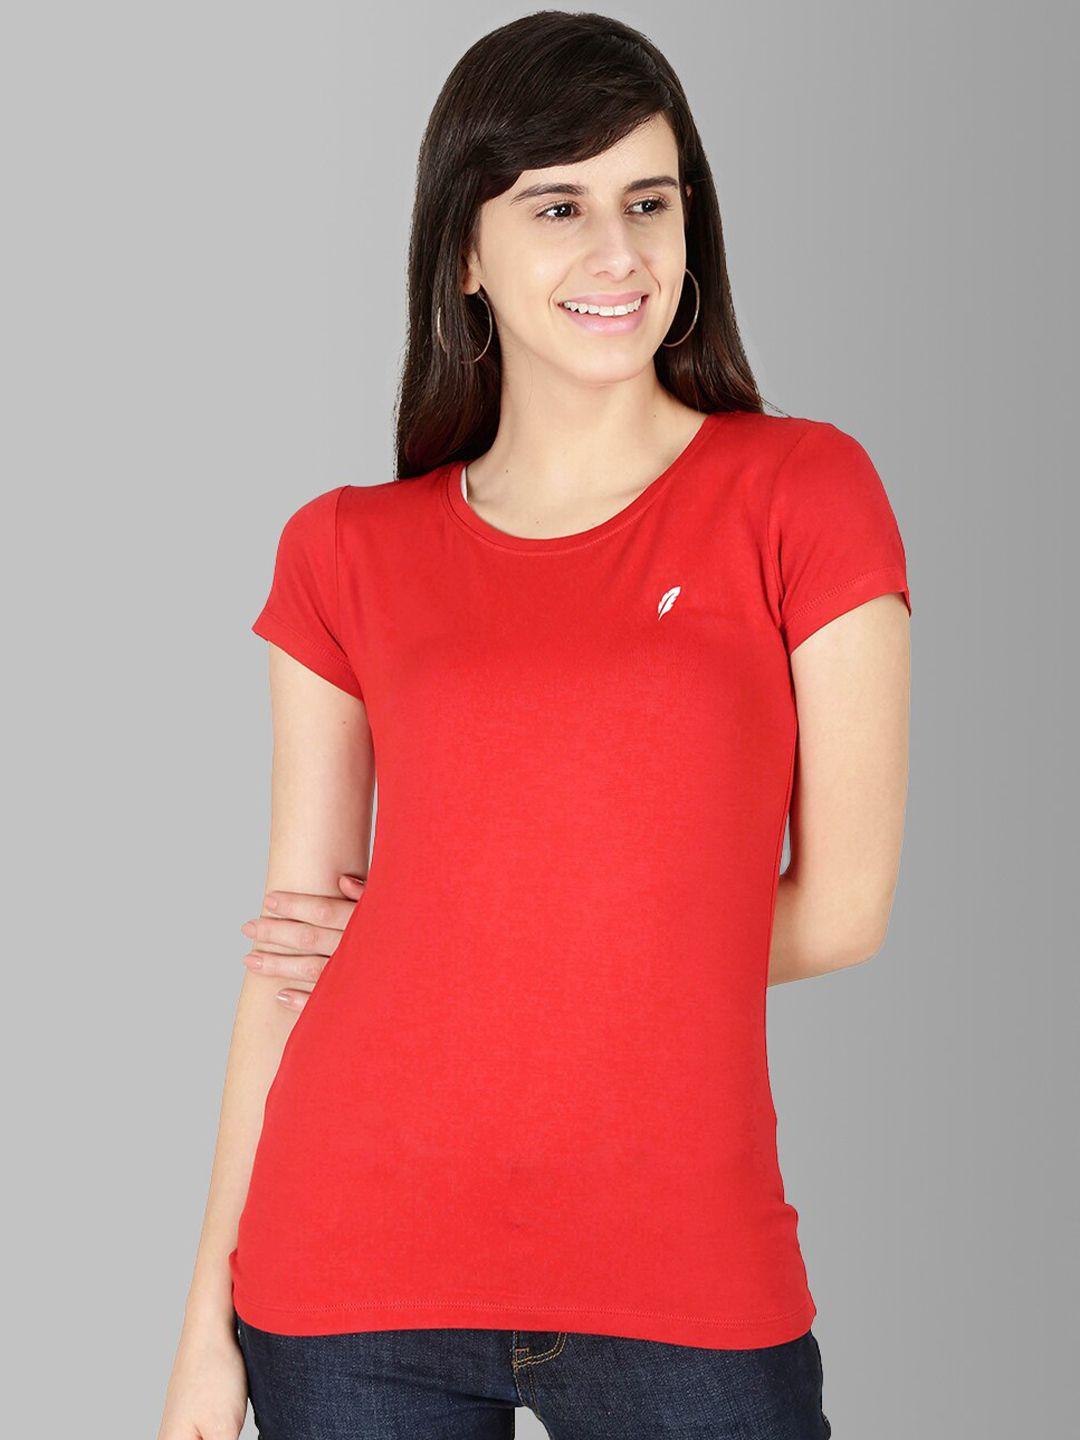 feather soft elite red slim fit running t-shirt